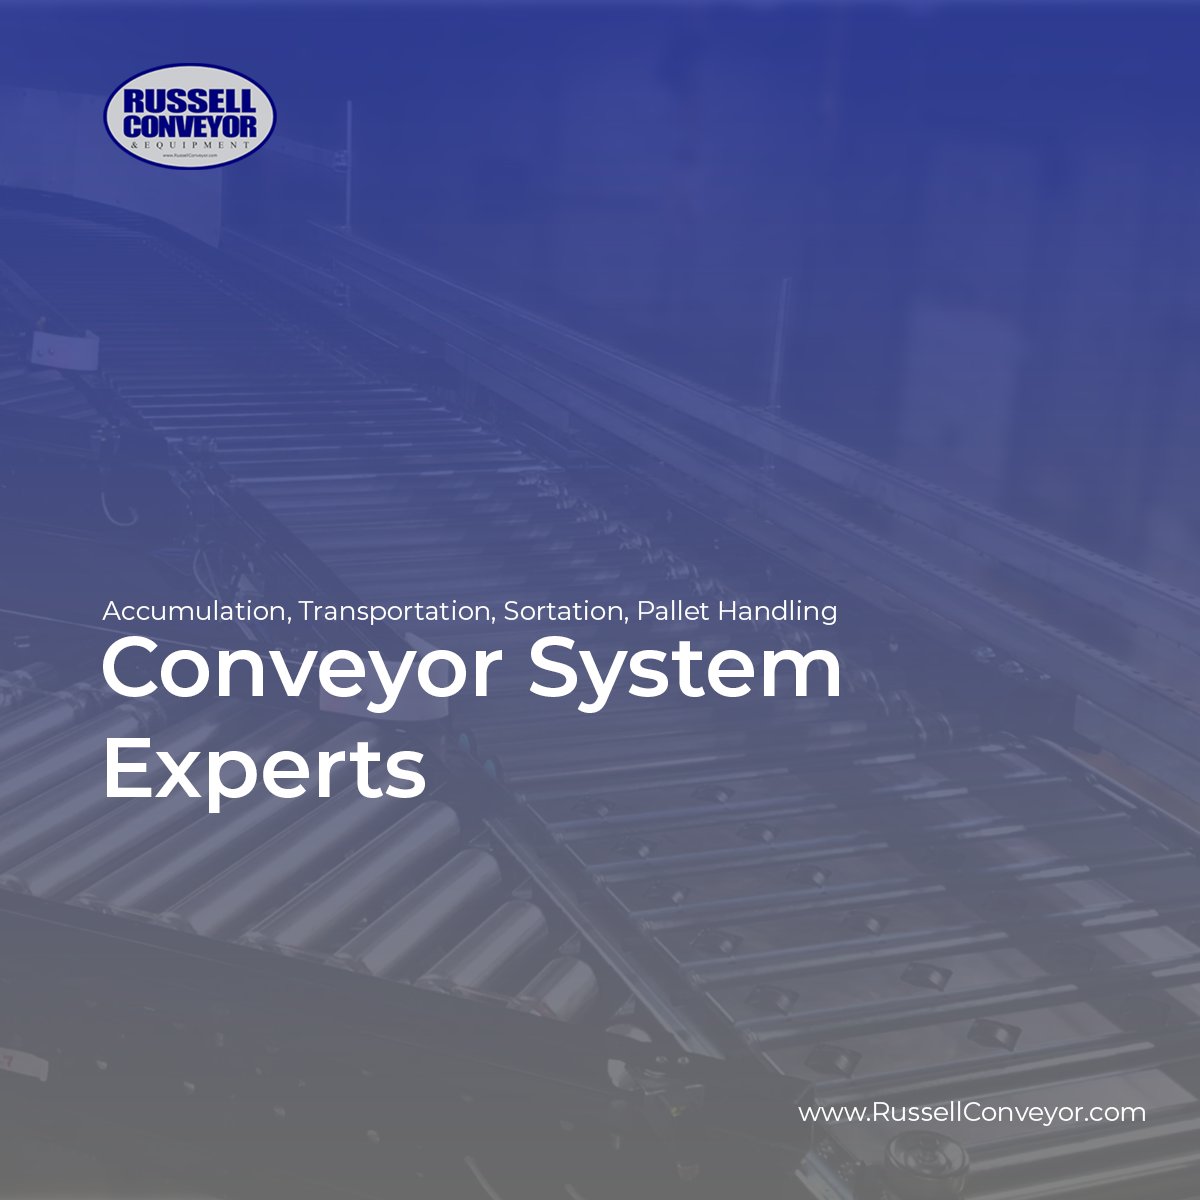 Do you need a conveyor system for your #corporation? Our #systems are designed to increase #efficiency and #productivity in your warehouse. With our systems, you’ll be able to move materials faster and easier than ever. bit.ly/3AEusa4